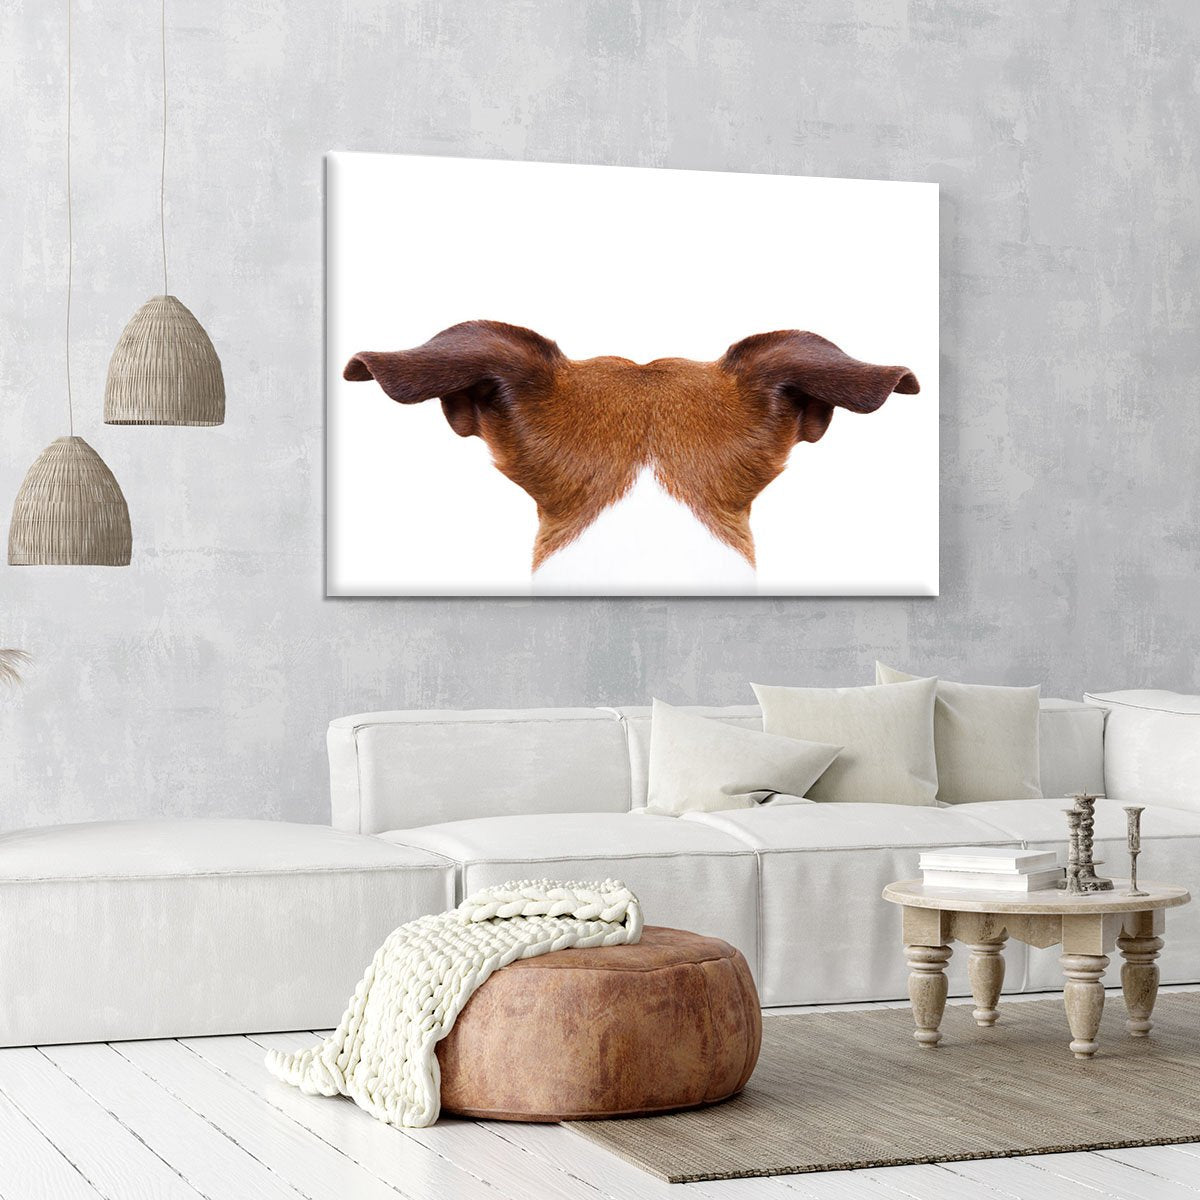 Jack russell dog looking and staring Canvas Print or Poster